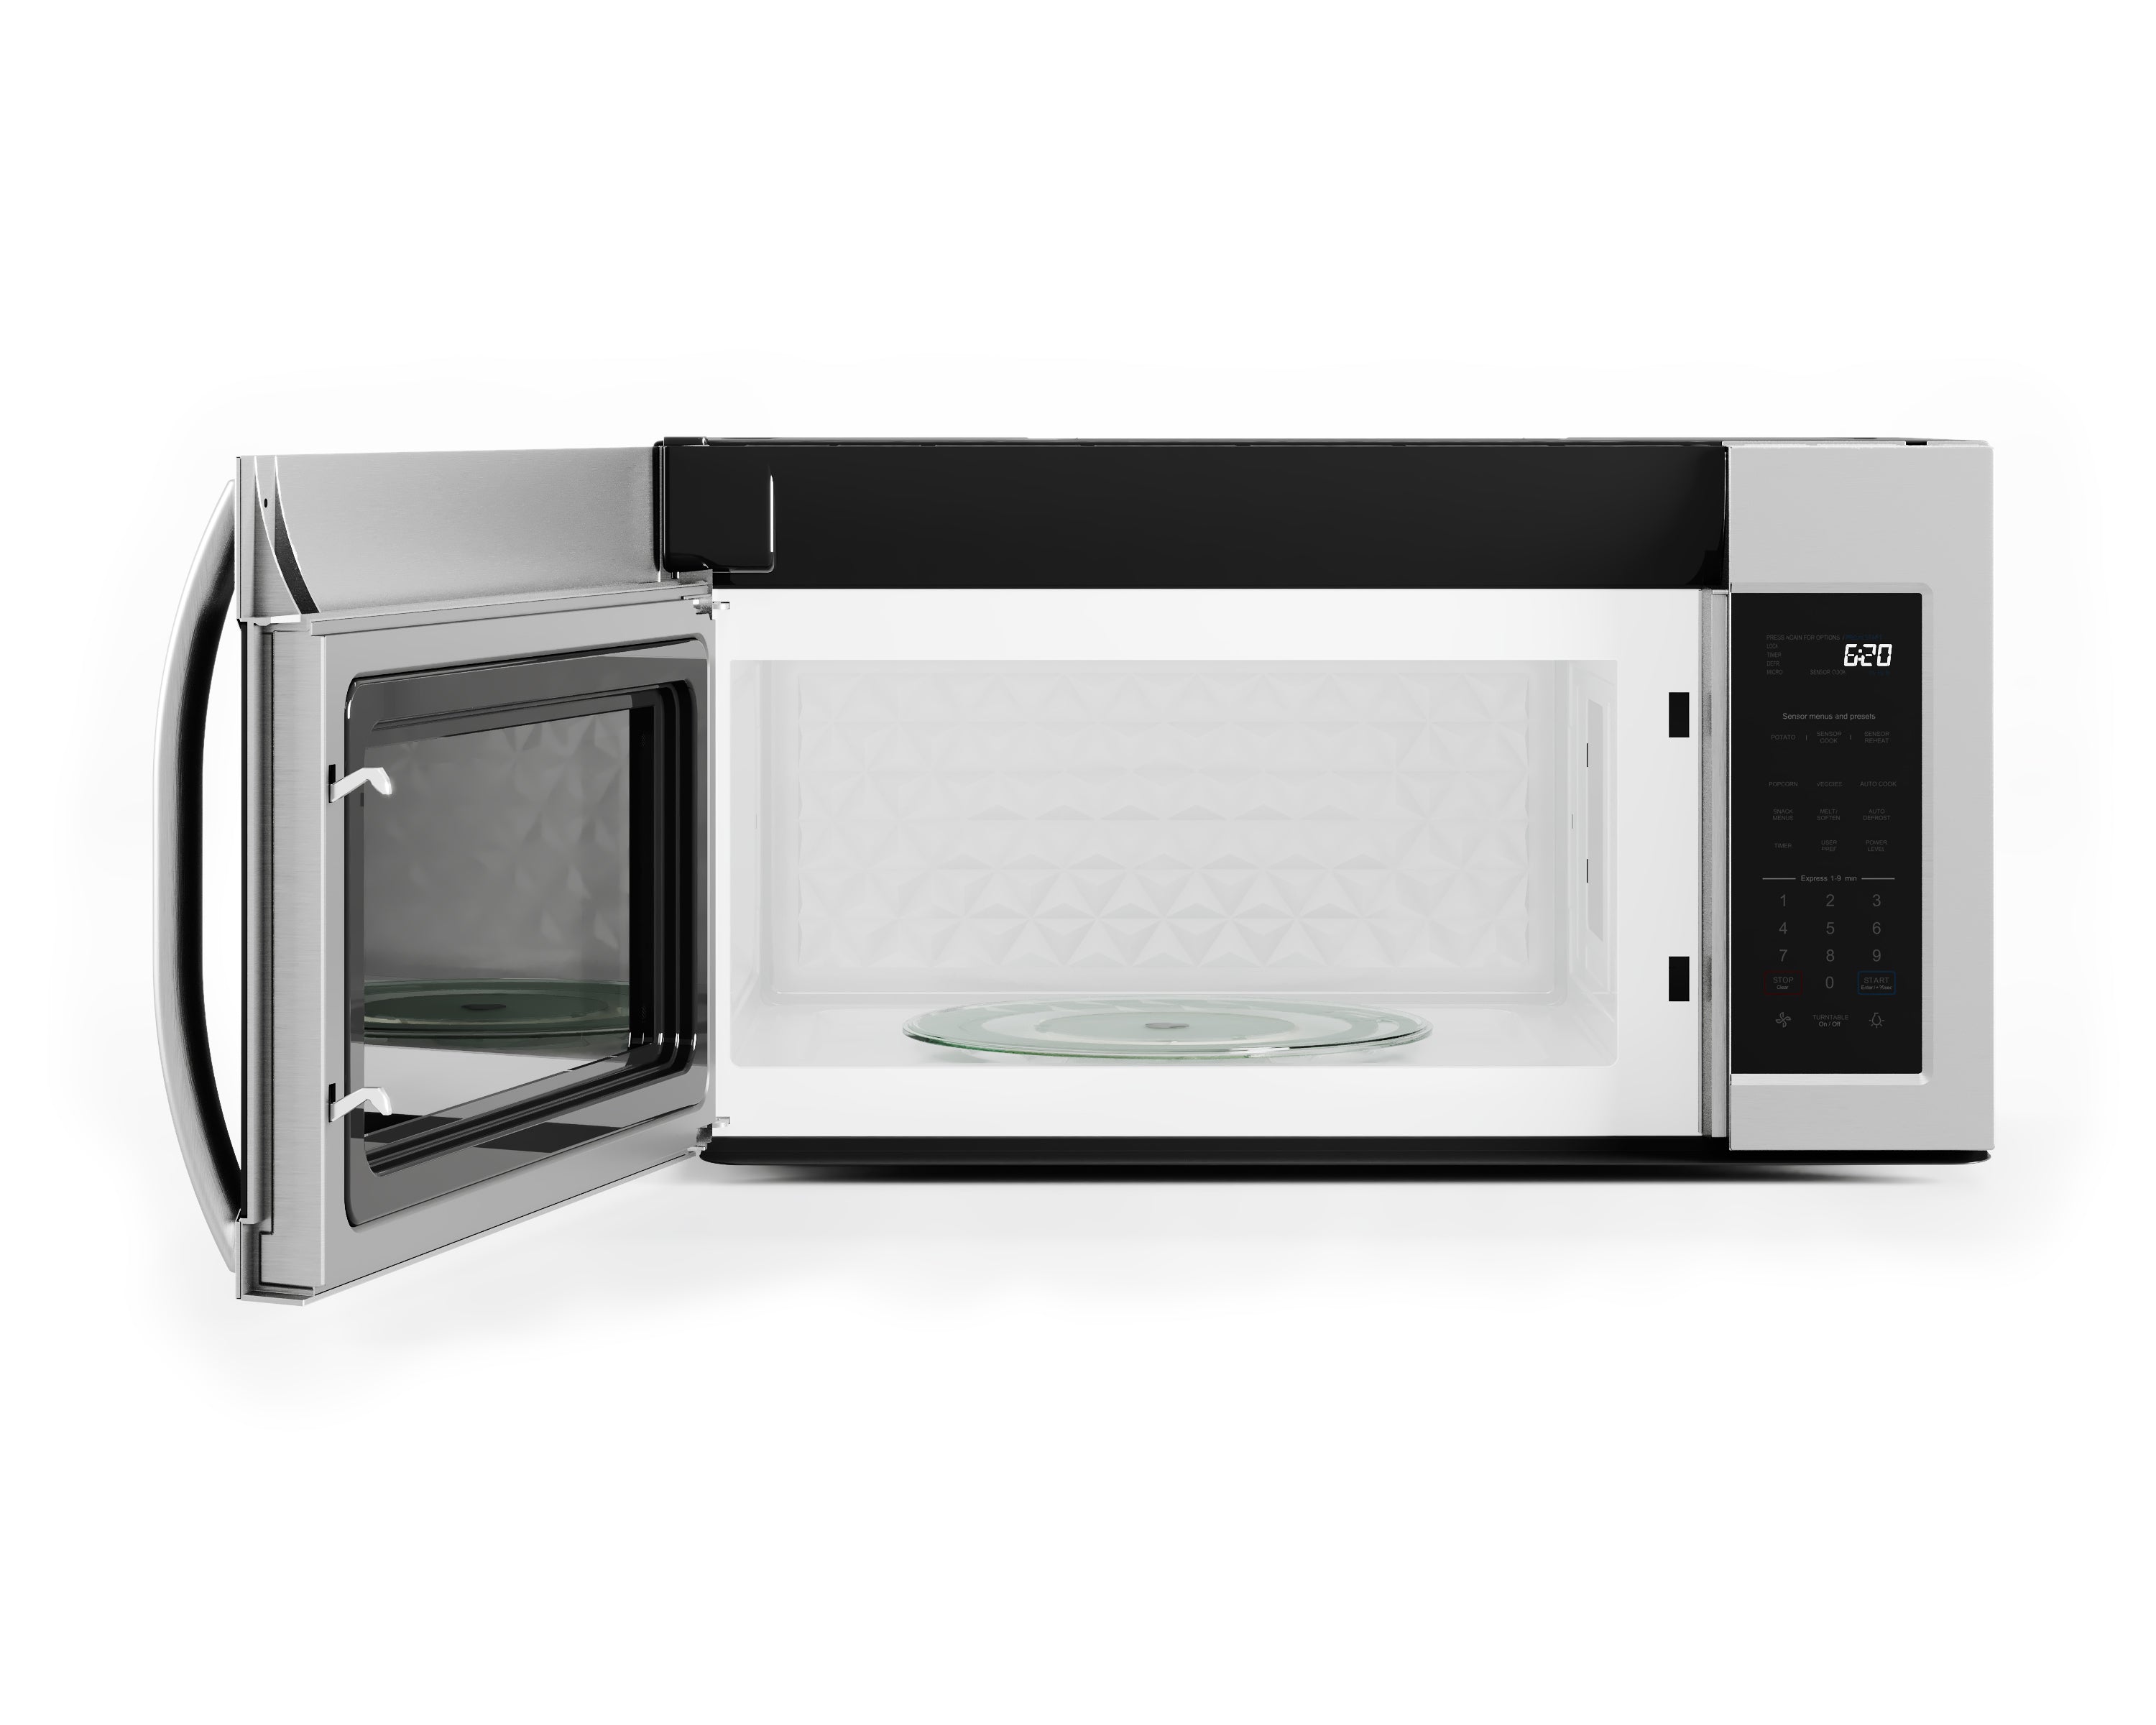 Midea 1.9 Cu. Ft. Over-the-Range Microwave in Stainless Steel (MMO19S3AST)